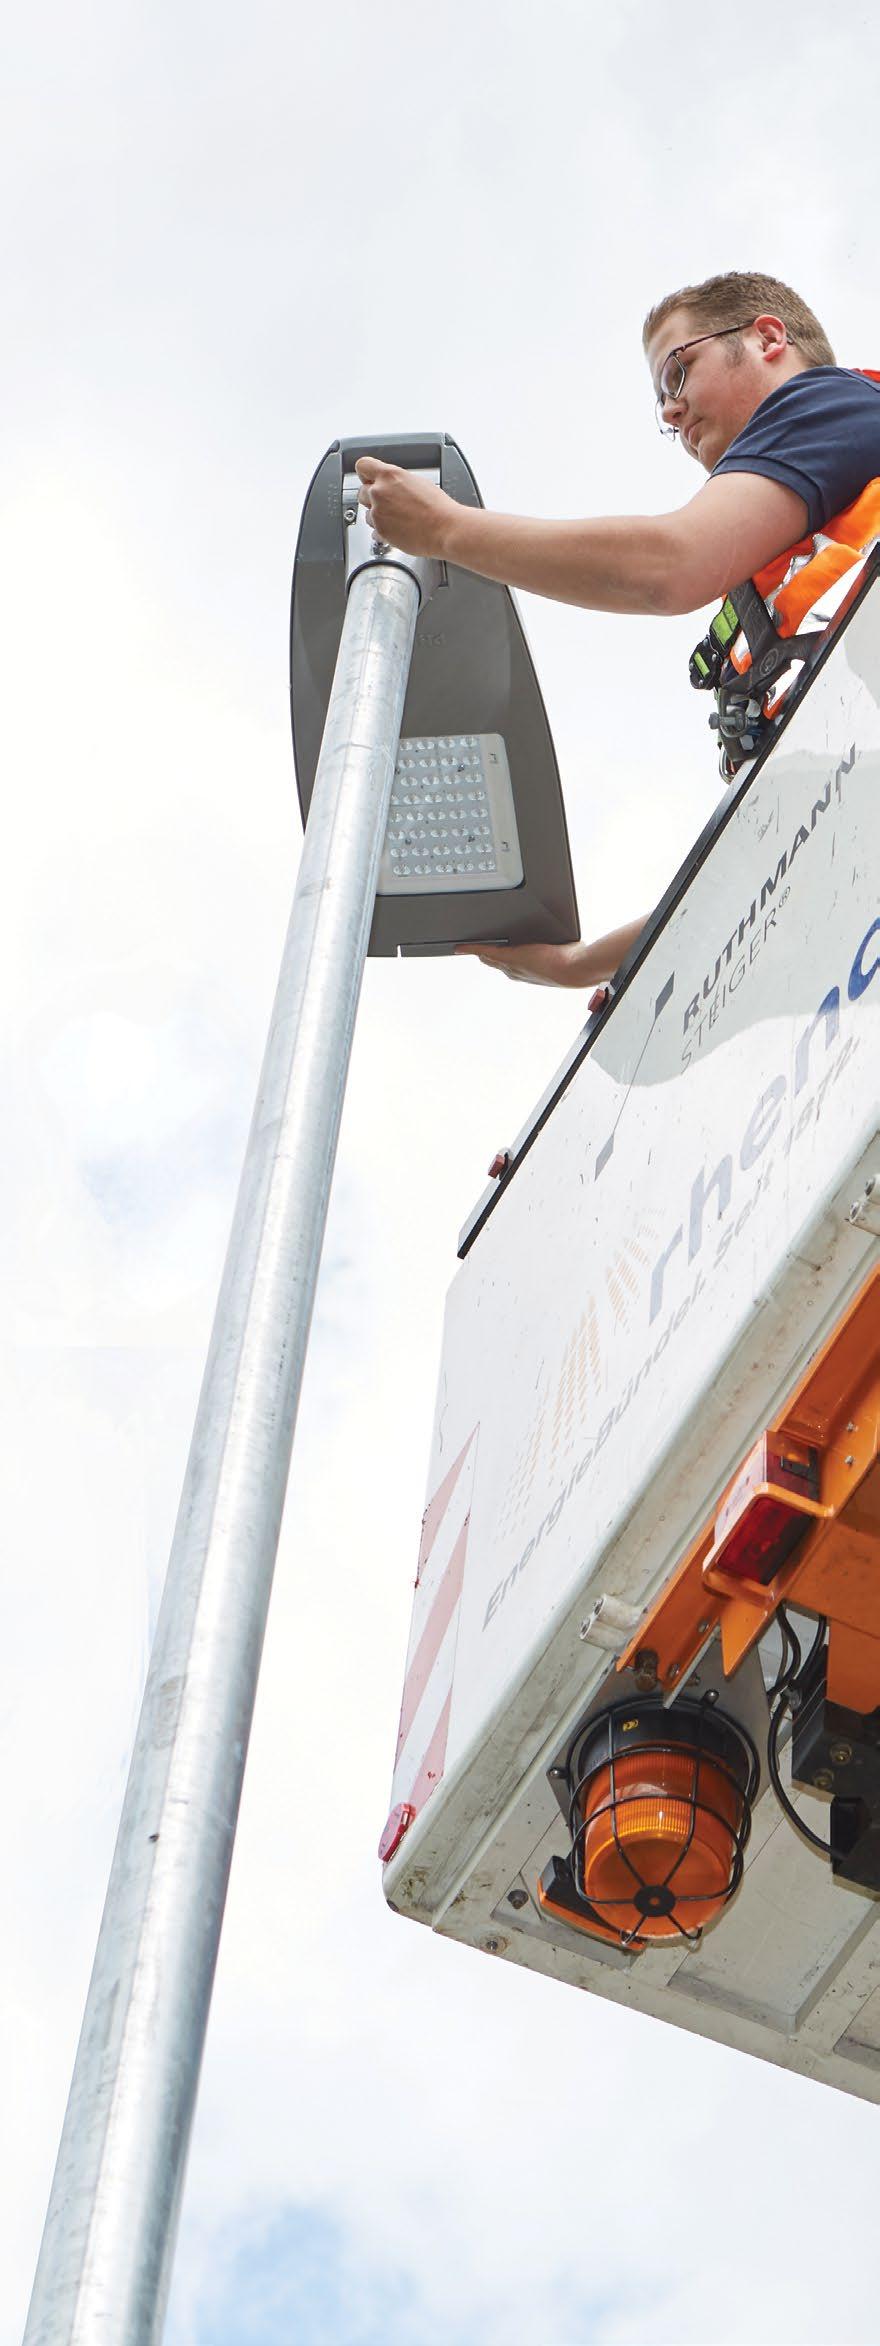 CityTouch Ready luminaires Key advantages: All CityTouch Ready luminaires are true plug-and-play solutions which can be handled exactly like traditional luminaires during installation.